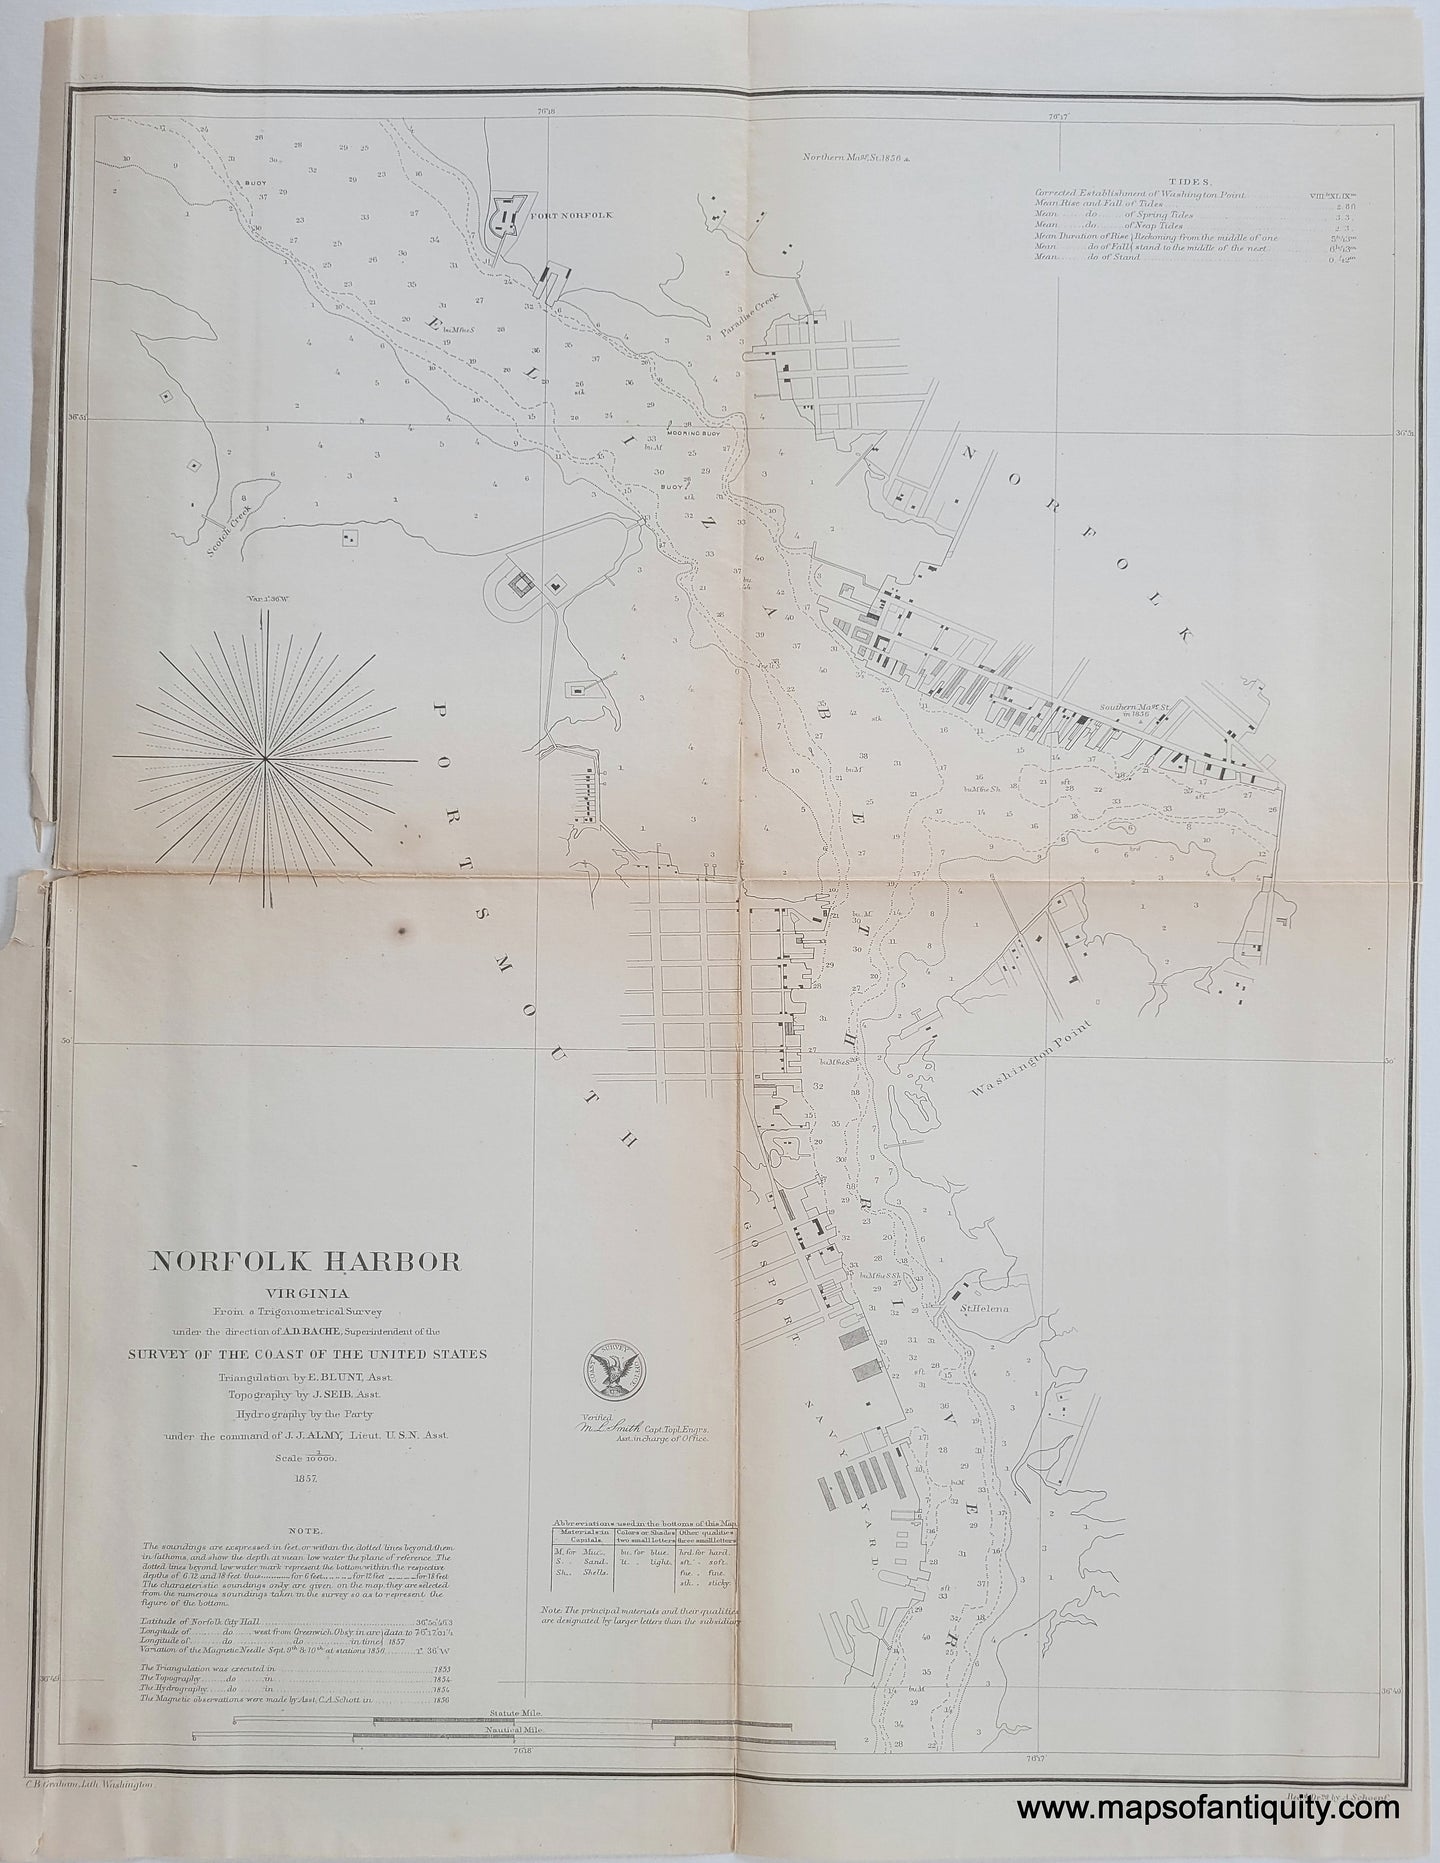 black and white coast survey report chart of Norfolk Harbor, VIrginia with buildings, roads, water depths. published 1857 by the US Coast Survey.